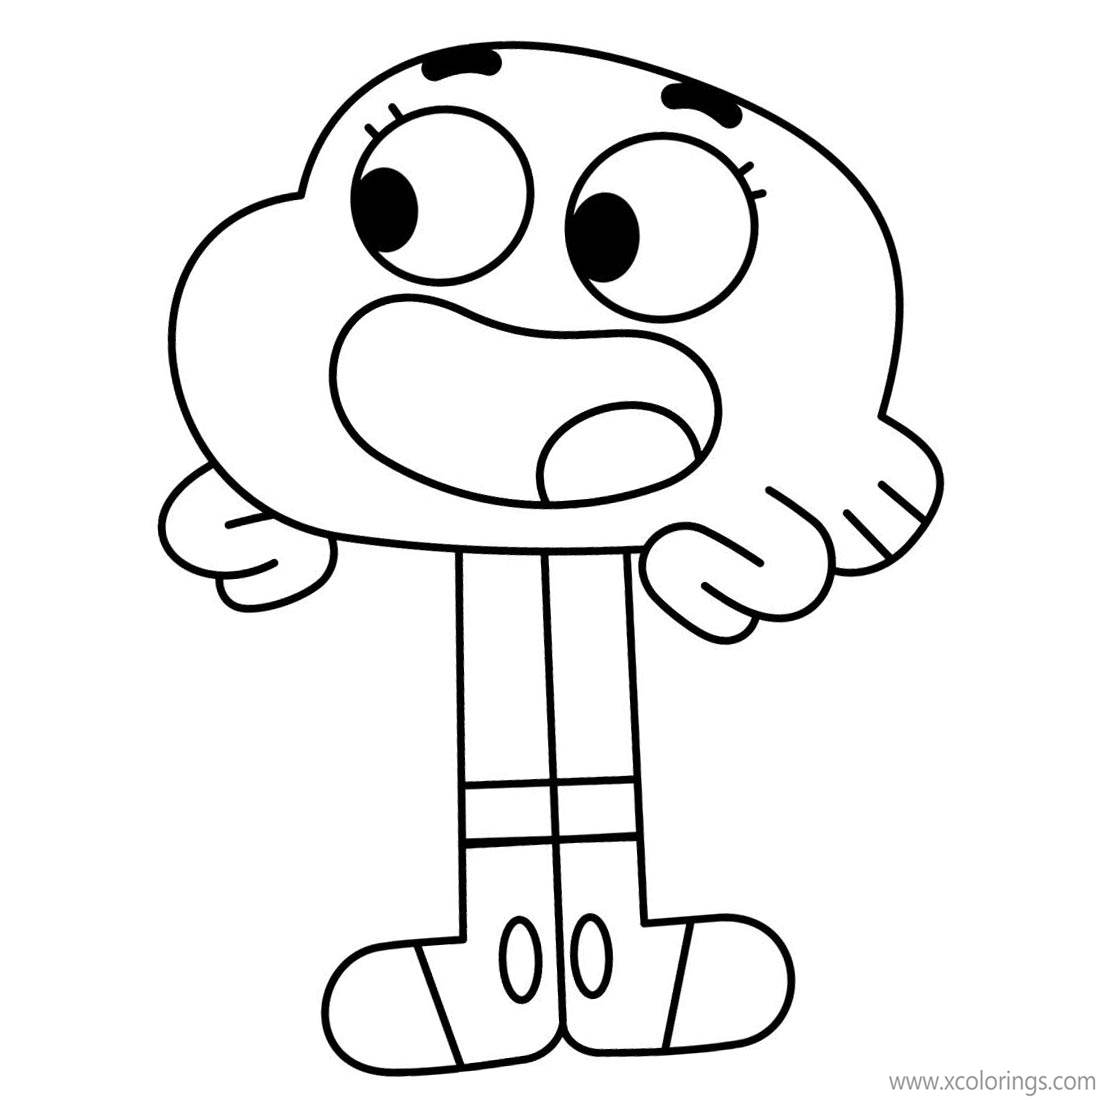 Free The Amazing World of Gumball Coloring Pages Darwin Watterson was Surprised printable